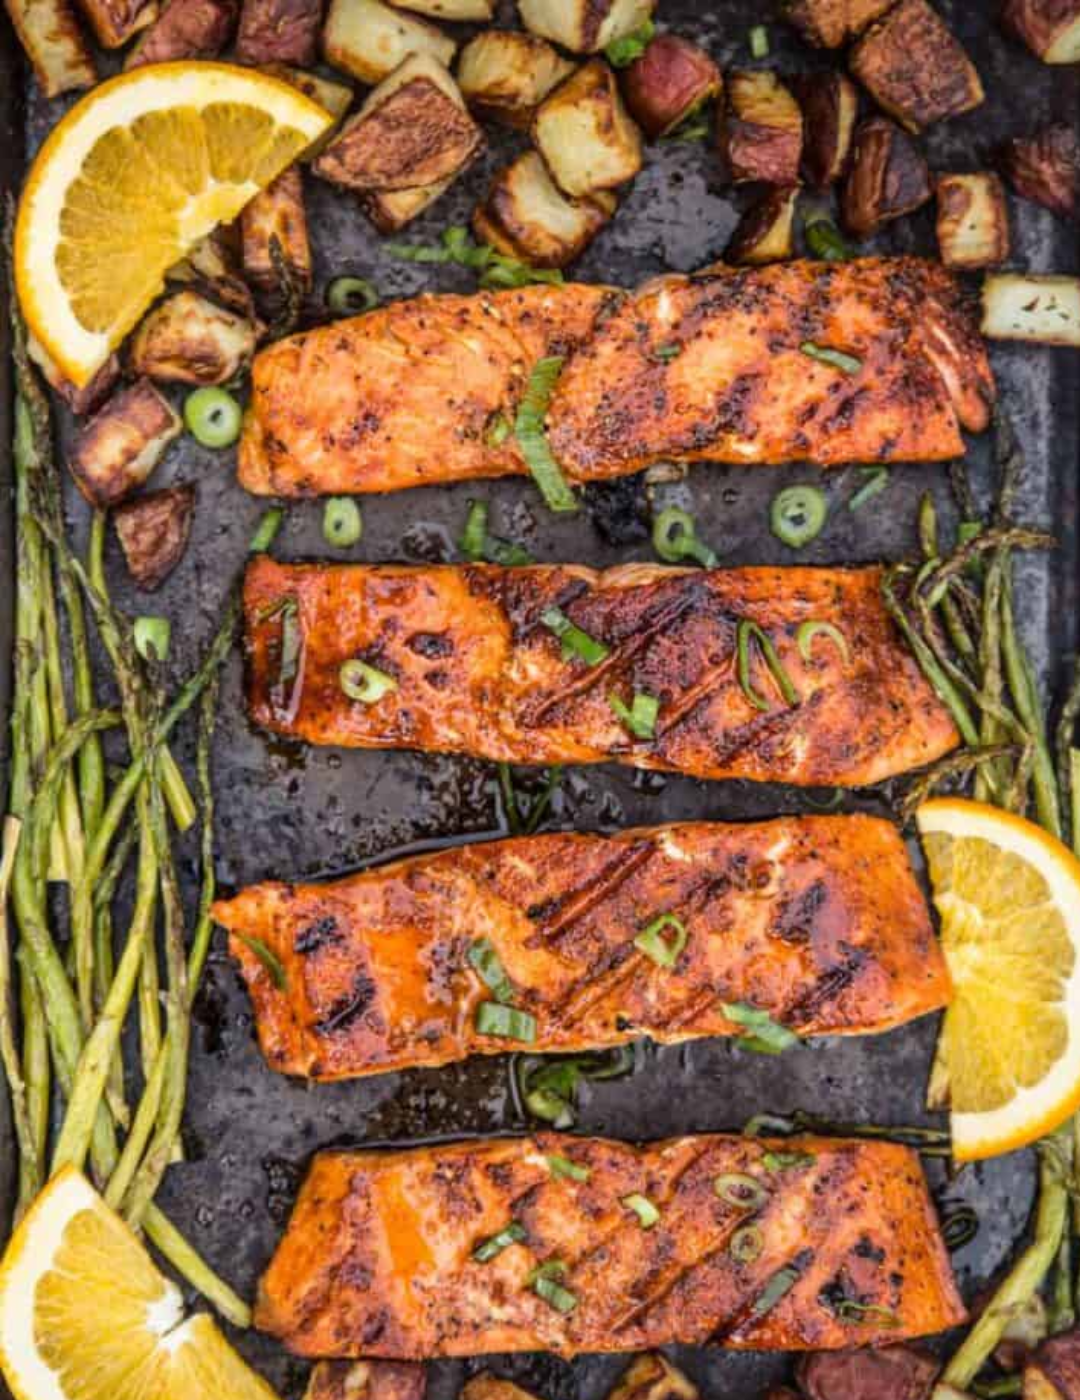 Grilled Salmon with Maple Glaze